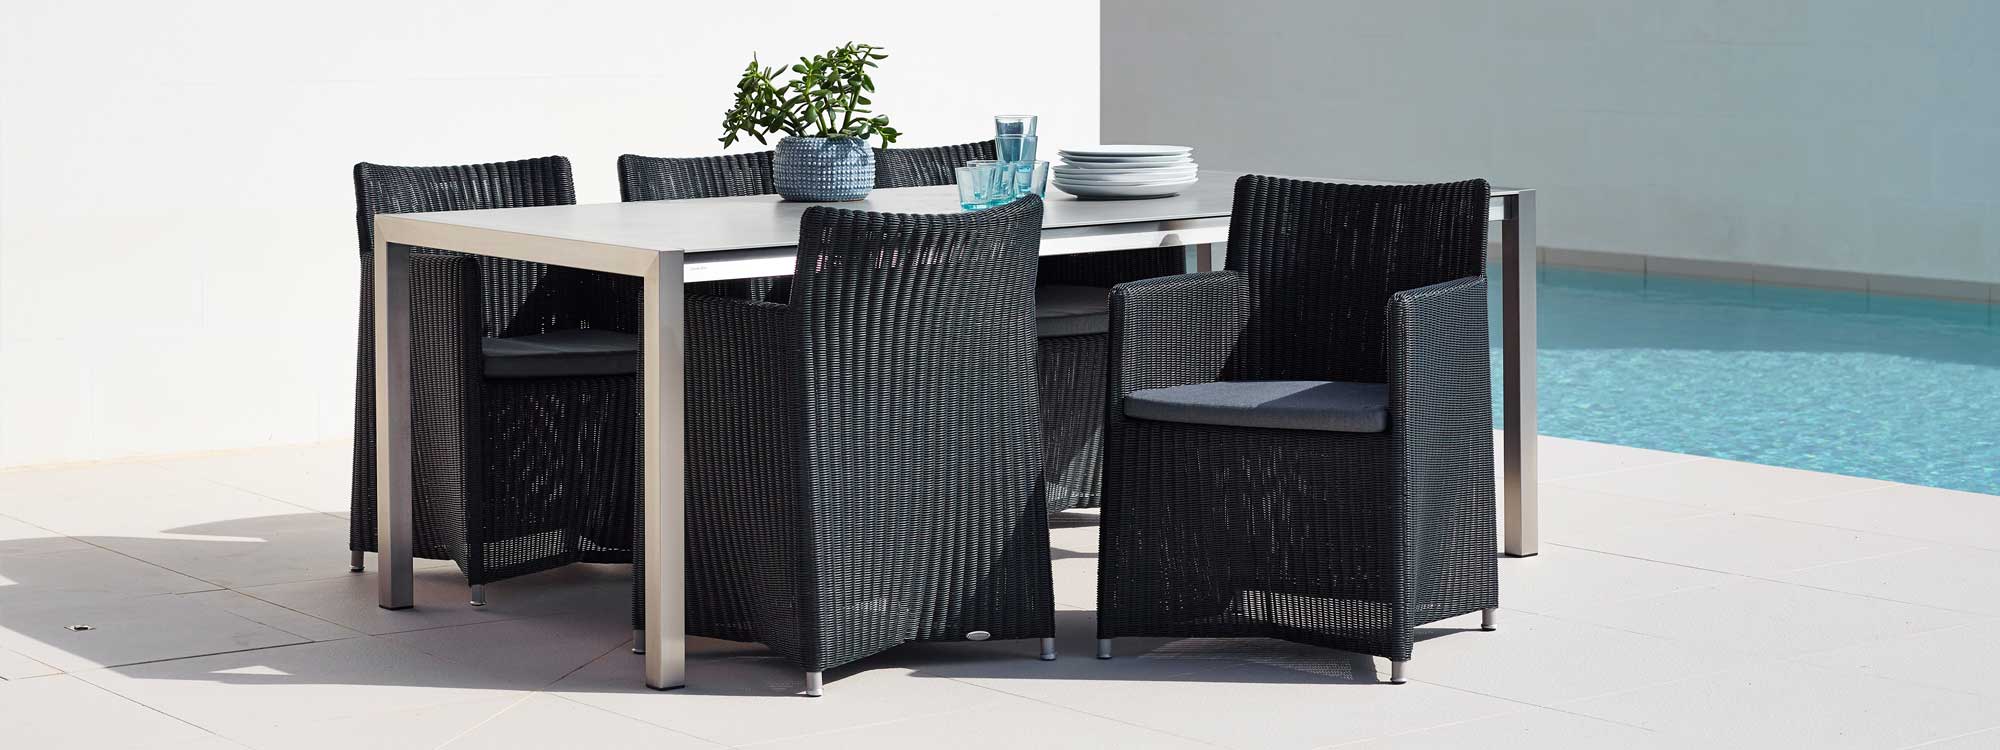 Image of Diamond garden chairs in black rattan together with Cane-line stainless steel garden table